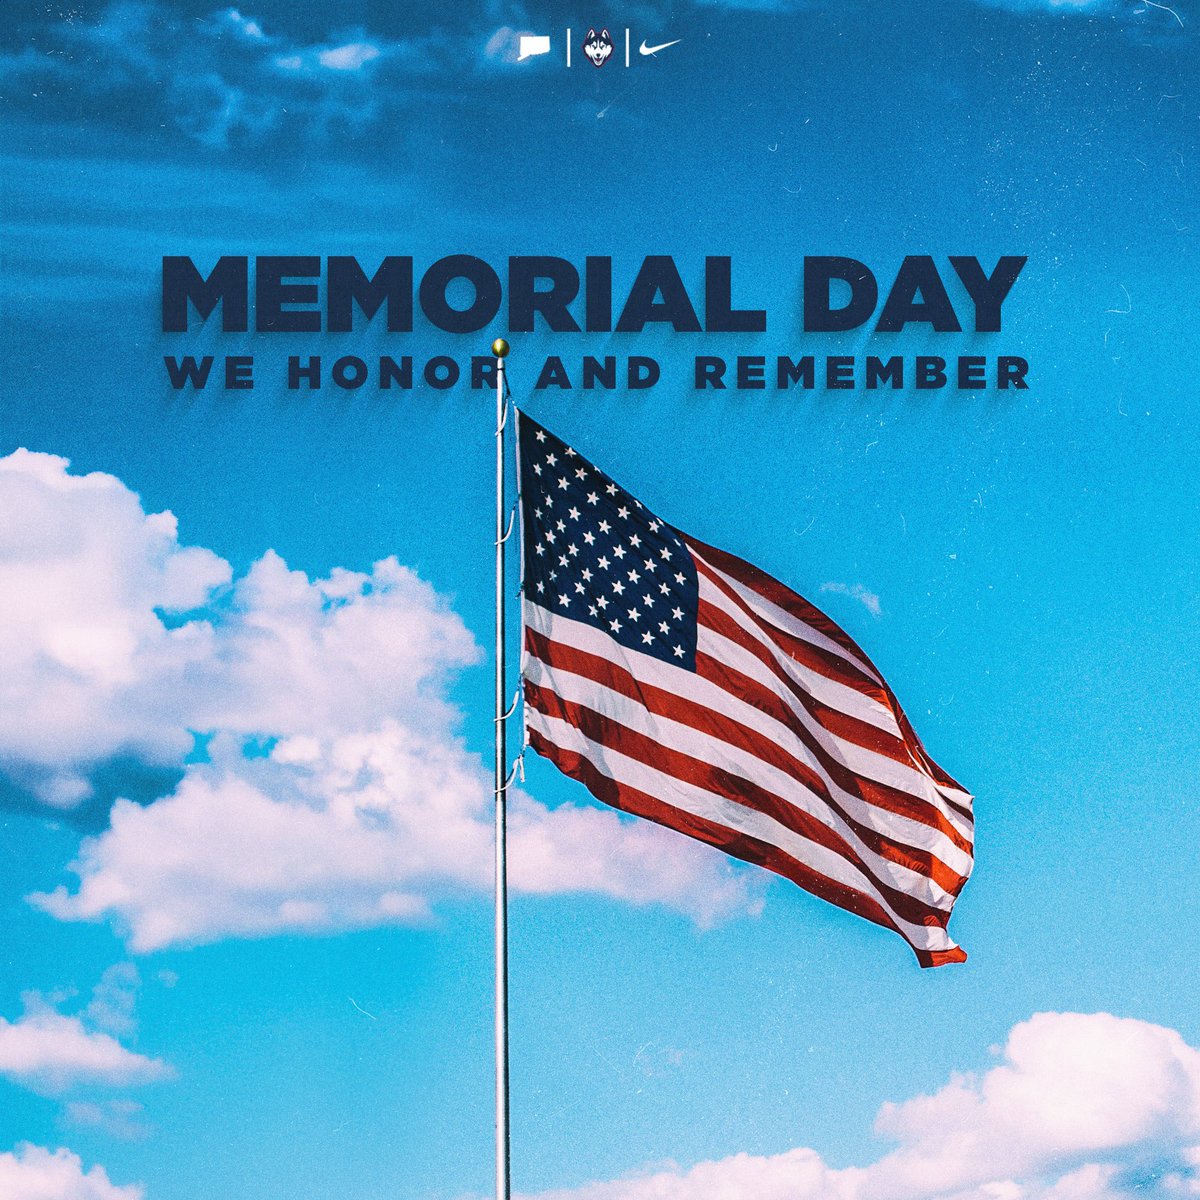 Today and every day, we honor and remember the brave men and women who made the ultimate sacrifice for our country 🇺🇸